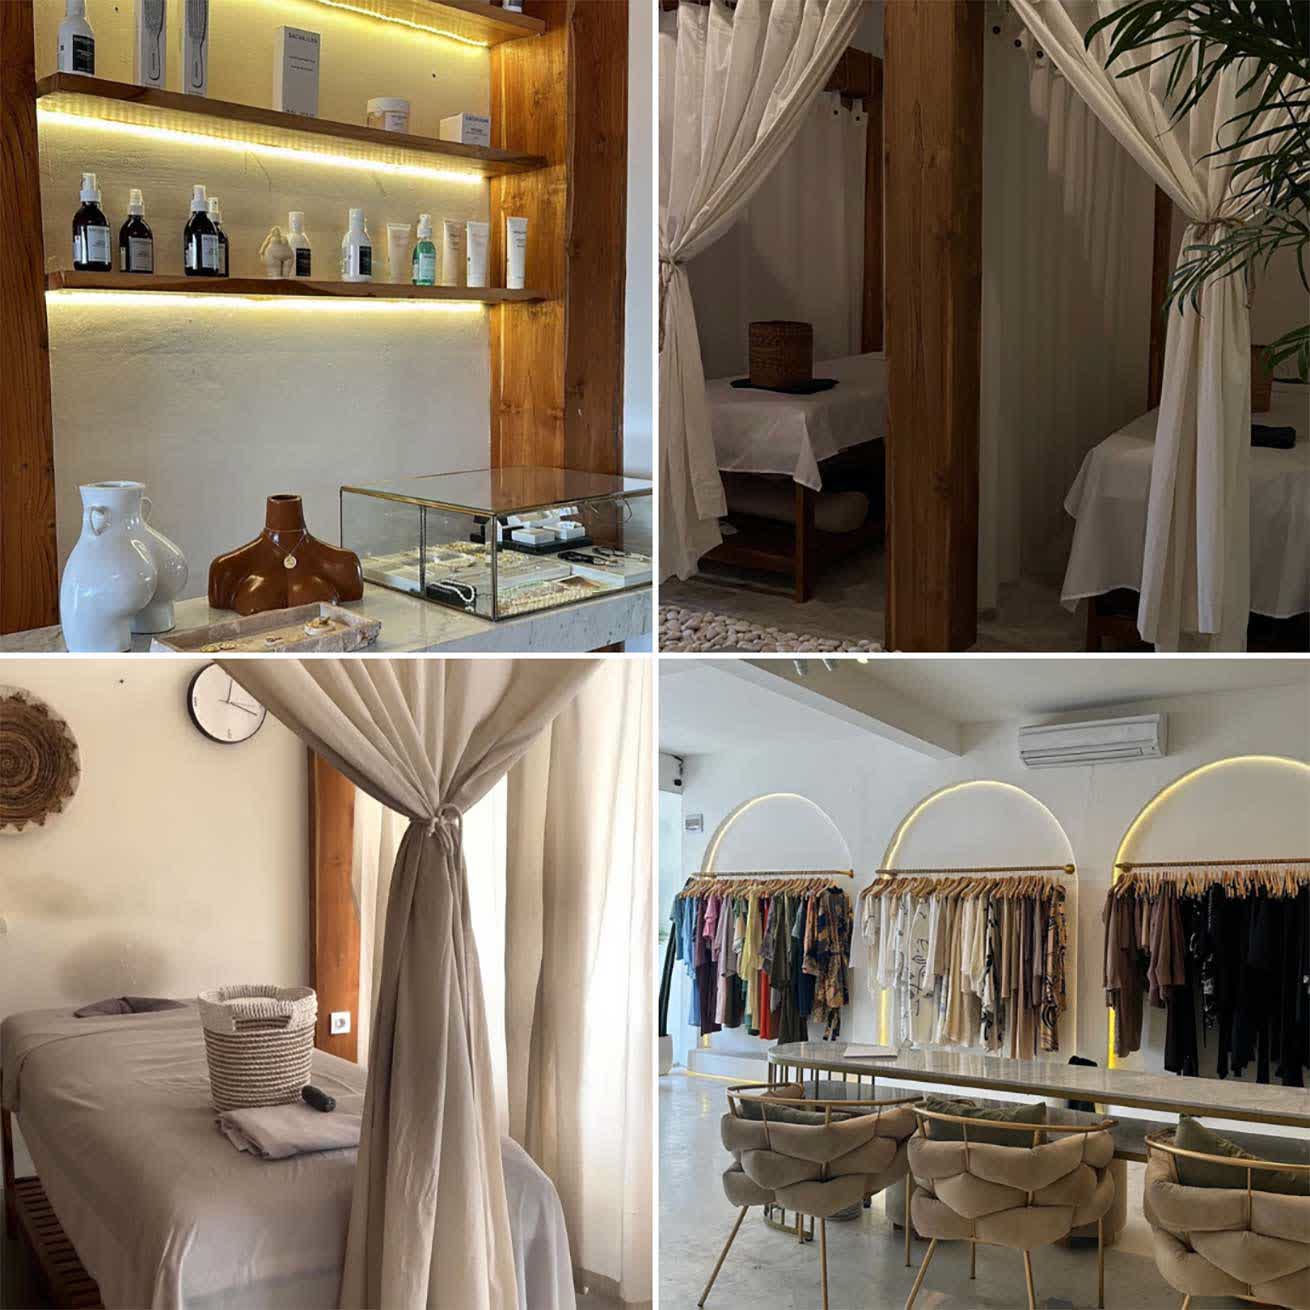 All the rooms and caring products in Our Spa & Boutique